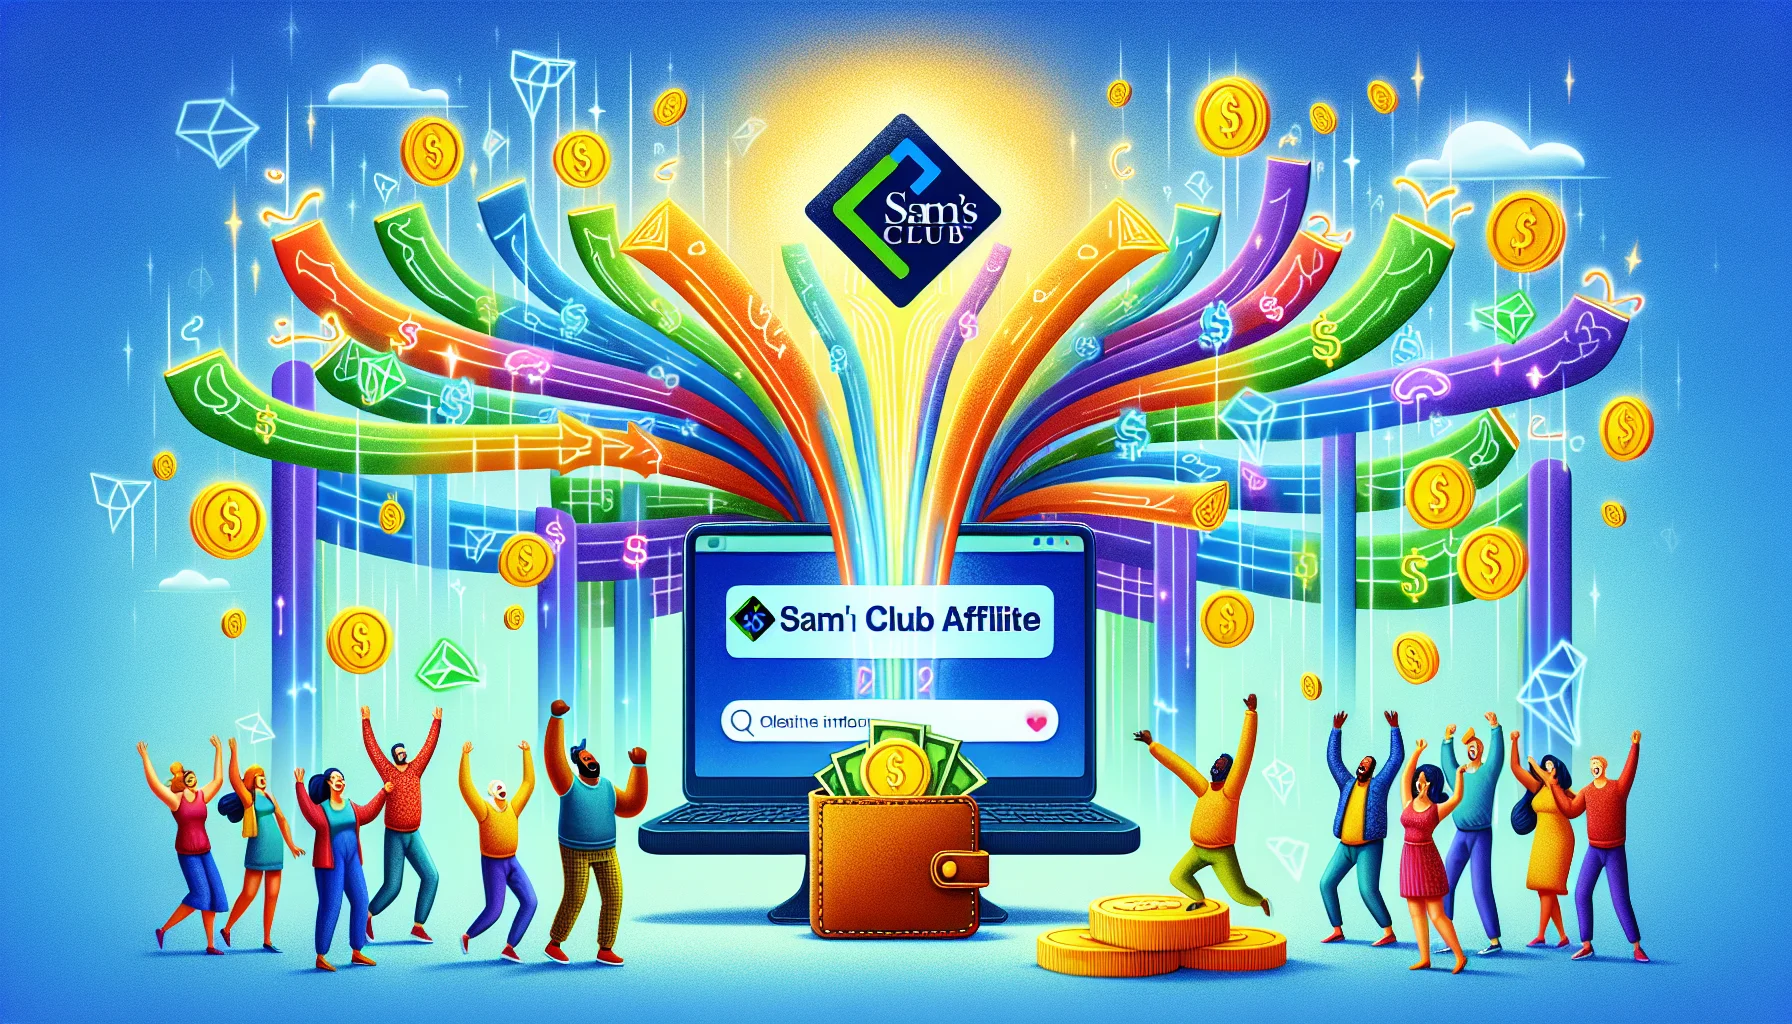 A whimsical scene showcasing an abstract representation of Sam's Club affiliate program in its relation to creating online income. Visualize an oversized computer screen, displaying a bright vivid website with the Sam's Club logo, and next to it, lines of digitally symbolic money flowing into a cartoonish wallet. Surround the scene with characters displaying joy and excitement, perhaps members of various racial backgrounds such as Caucasian, Asian, and Black, both men and women, reveling in the success of their ventures. Make the general atmosphere bright, colorful and full of positivity to illustrate the potential perks of such an affiliate program.